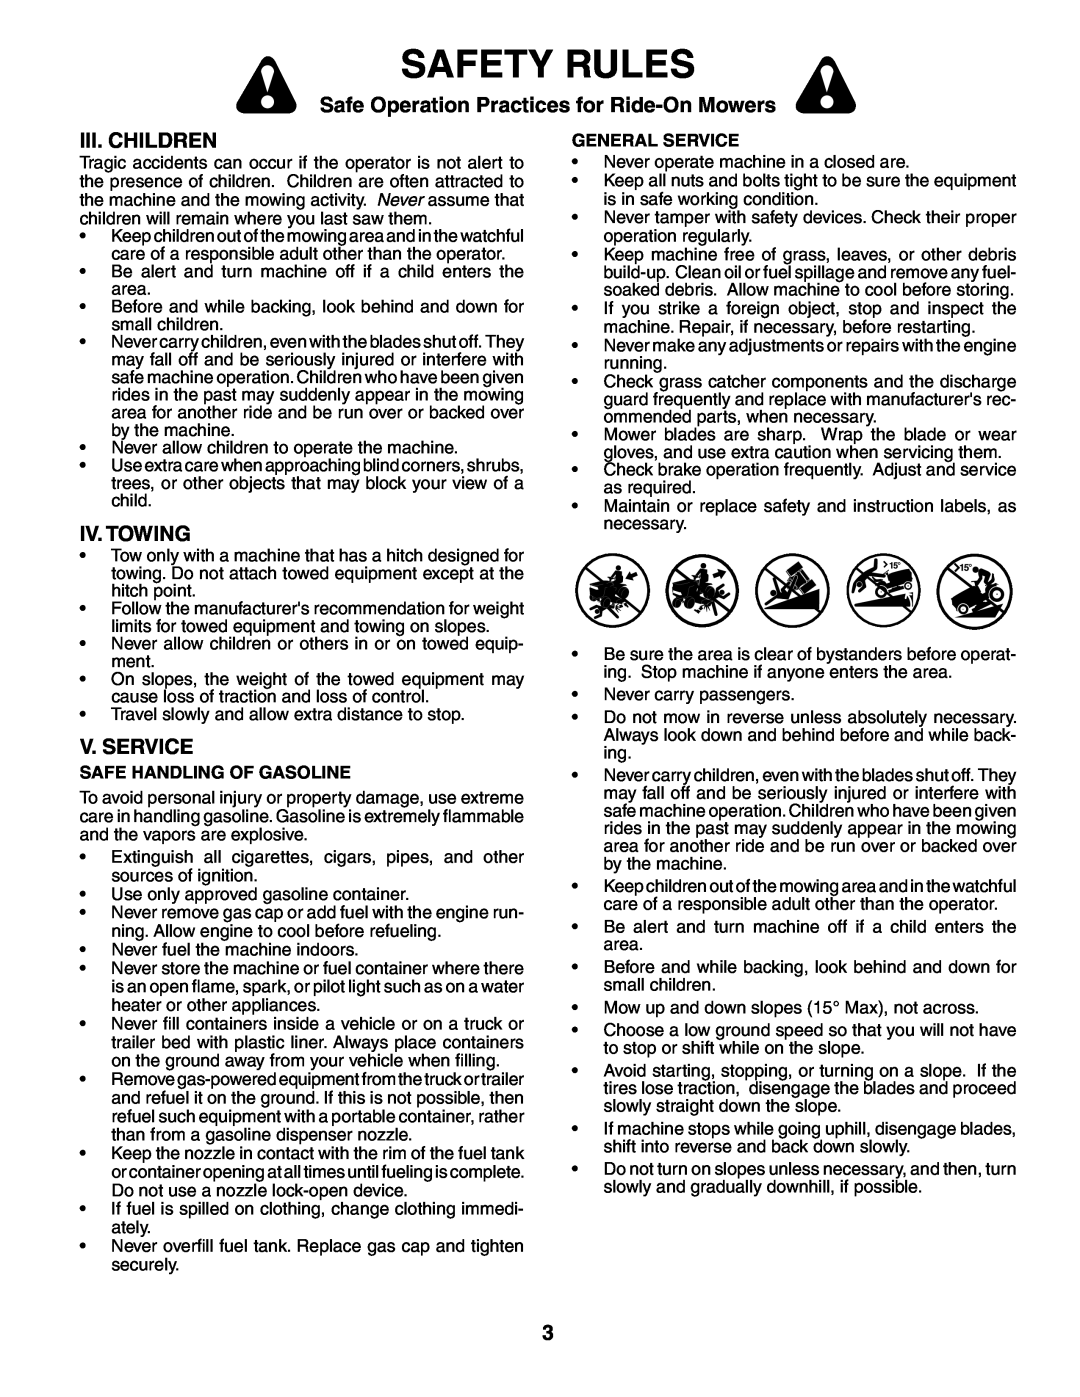 Poulan 401115 manual Iii. Children, Iv. Towing, V. Service, Safety Rules, Safe Operation Practices for Ride-On Mowers 